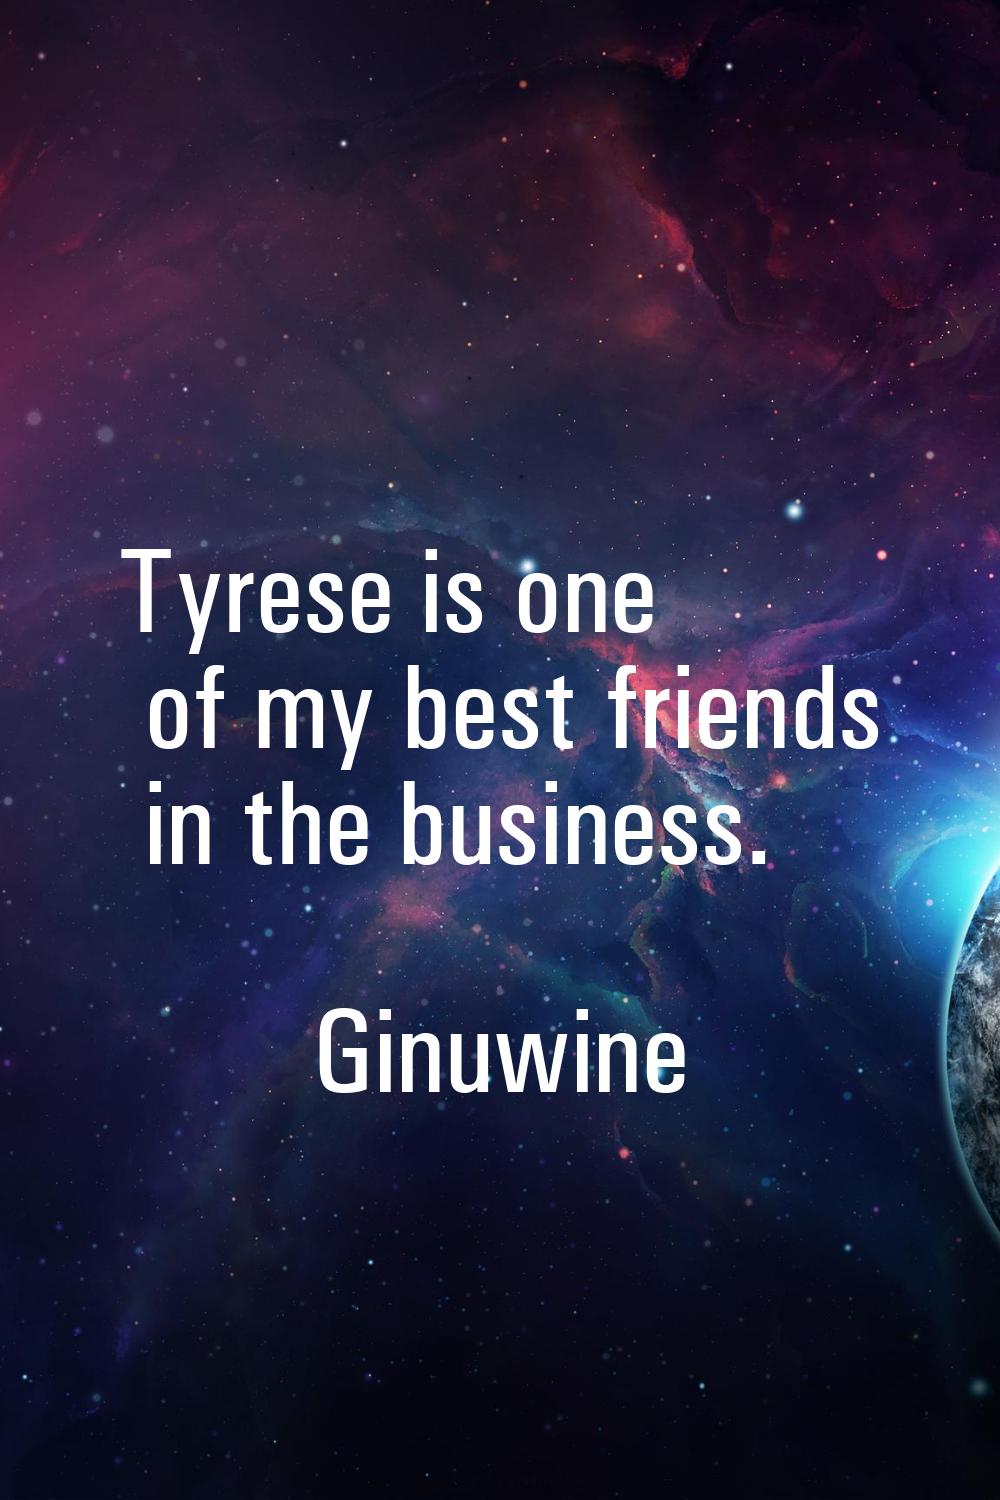 Tyrese is one of my best friends in the business.